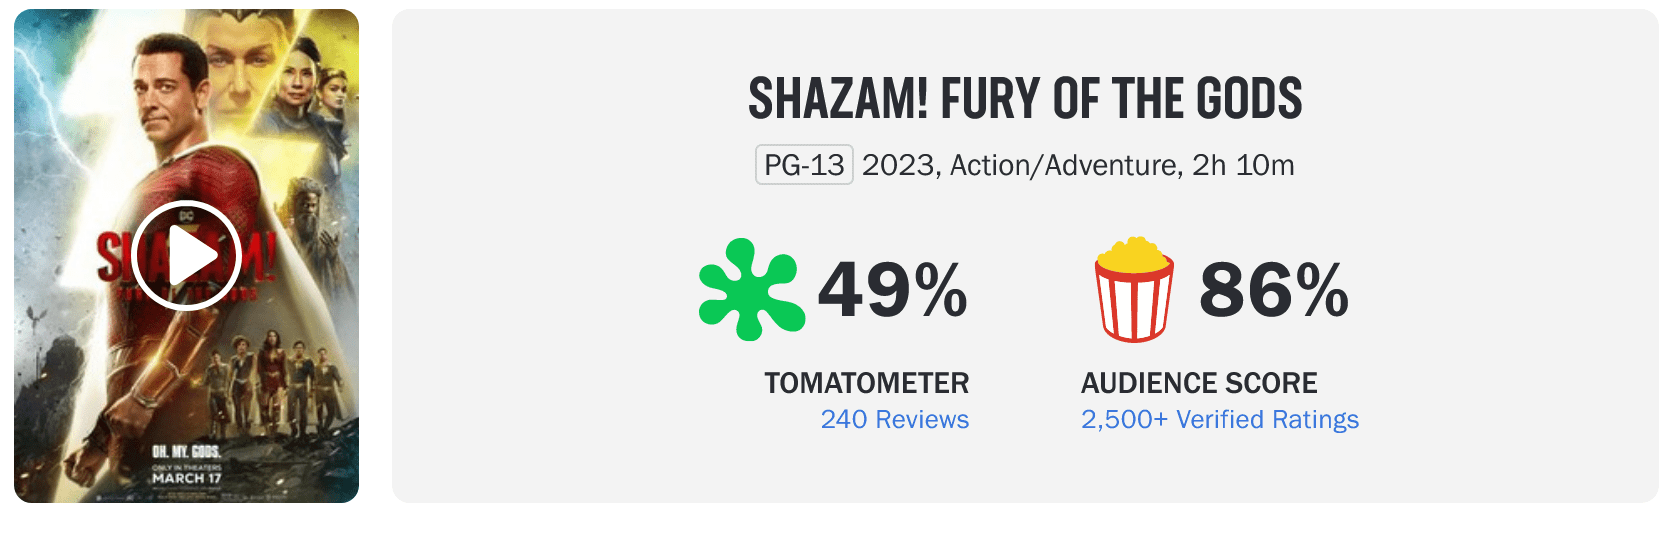 shazam gniew bogow oceny rotten tomatoes-min.png